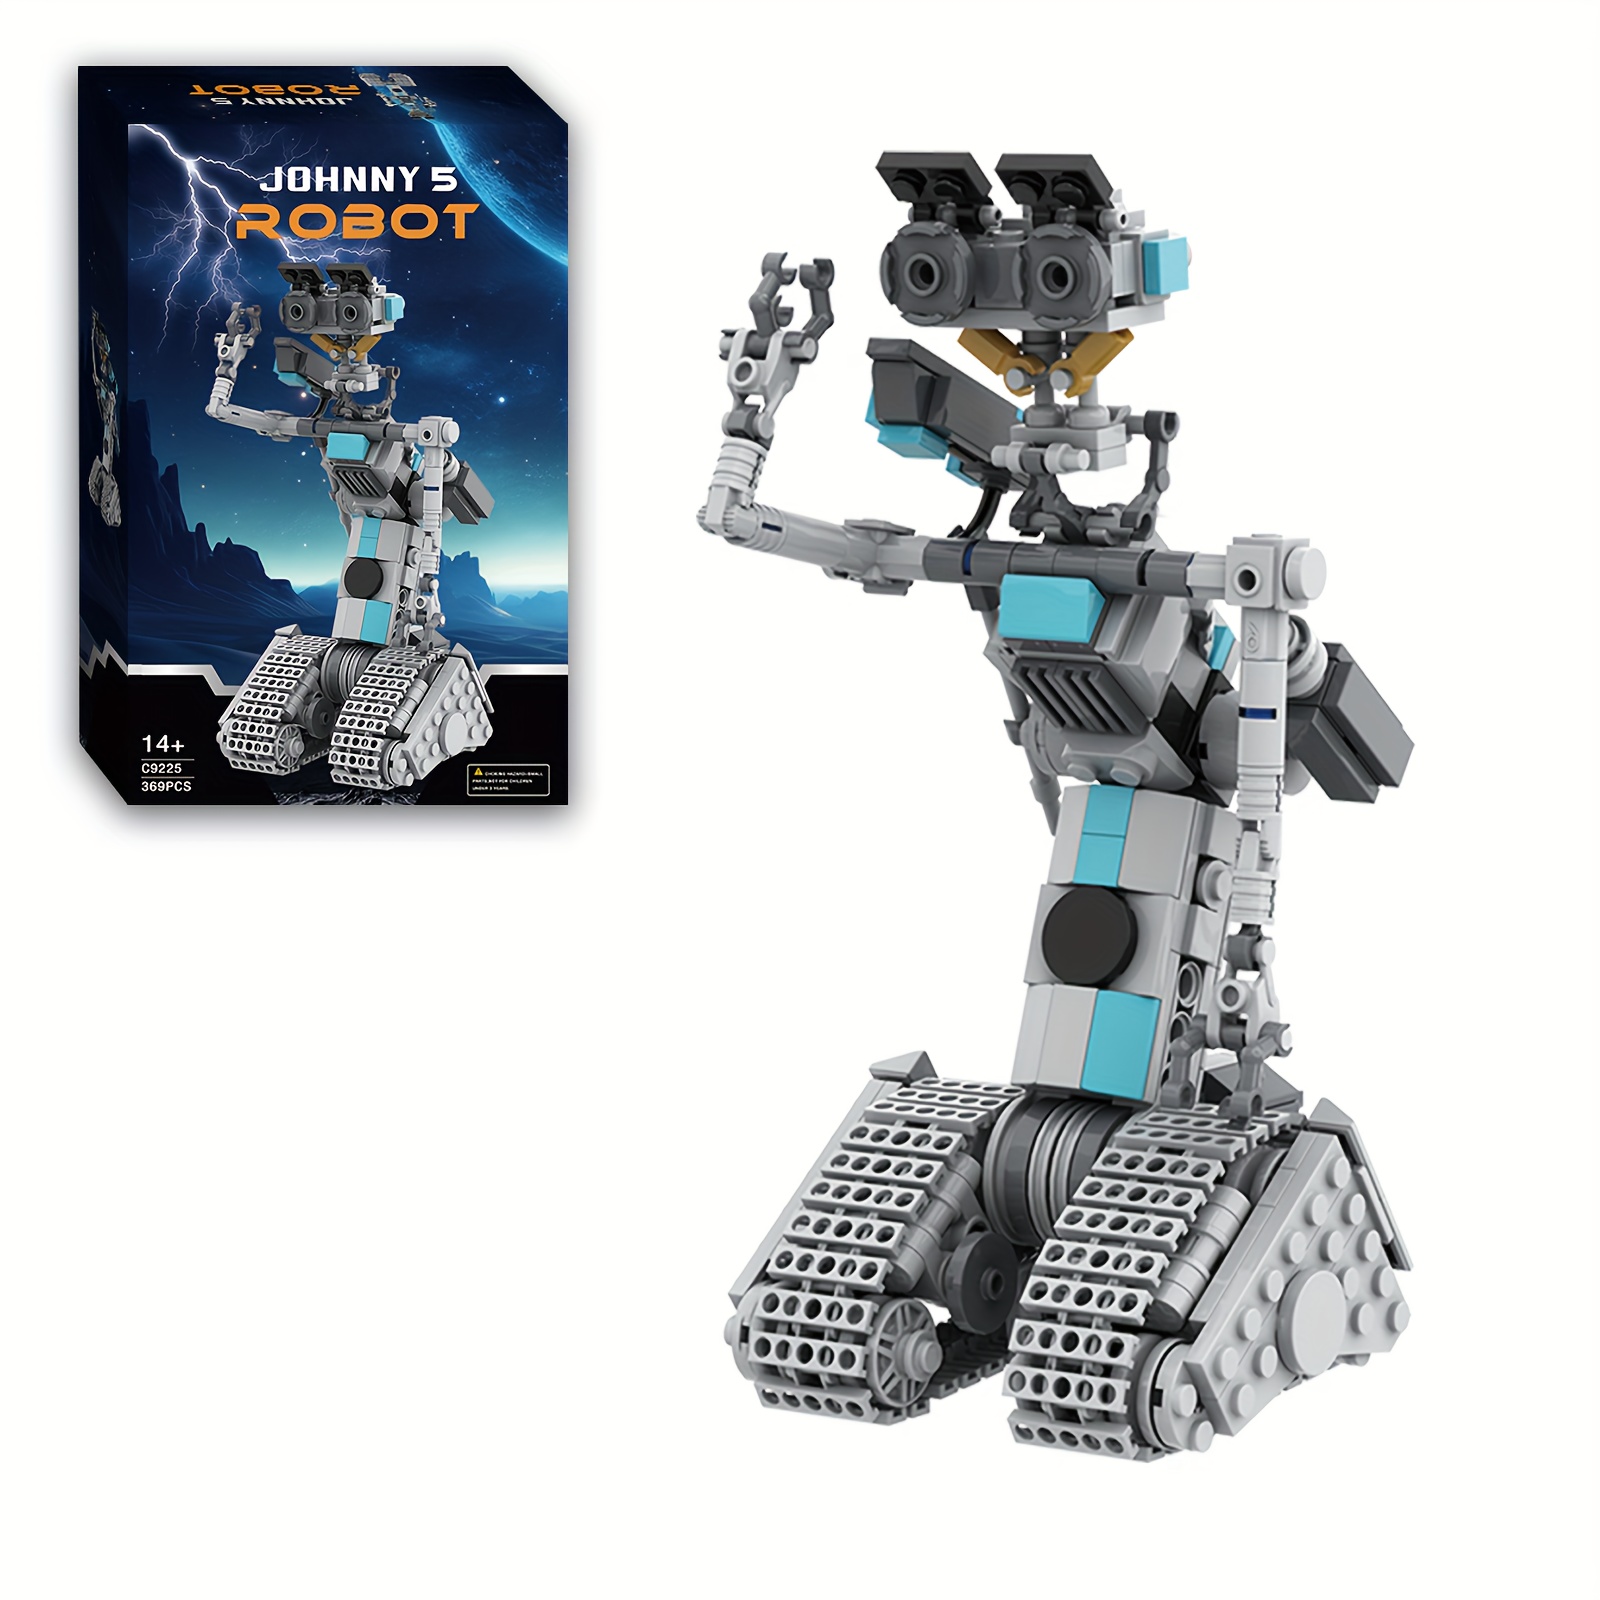 

369pcs Robot Building Toys, Movie Figures Robot Model Building Kit, Contains 1 Building Block Tool, Decoration Building Bricks Set For Adults, Boys, Girls, Thanksgiving Day/christmas/birthday Gift